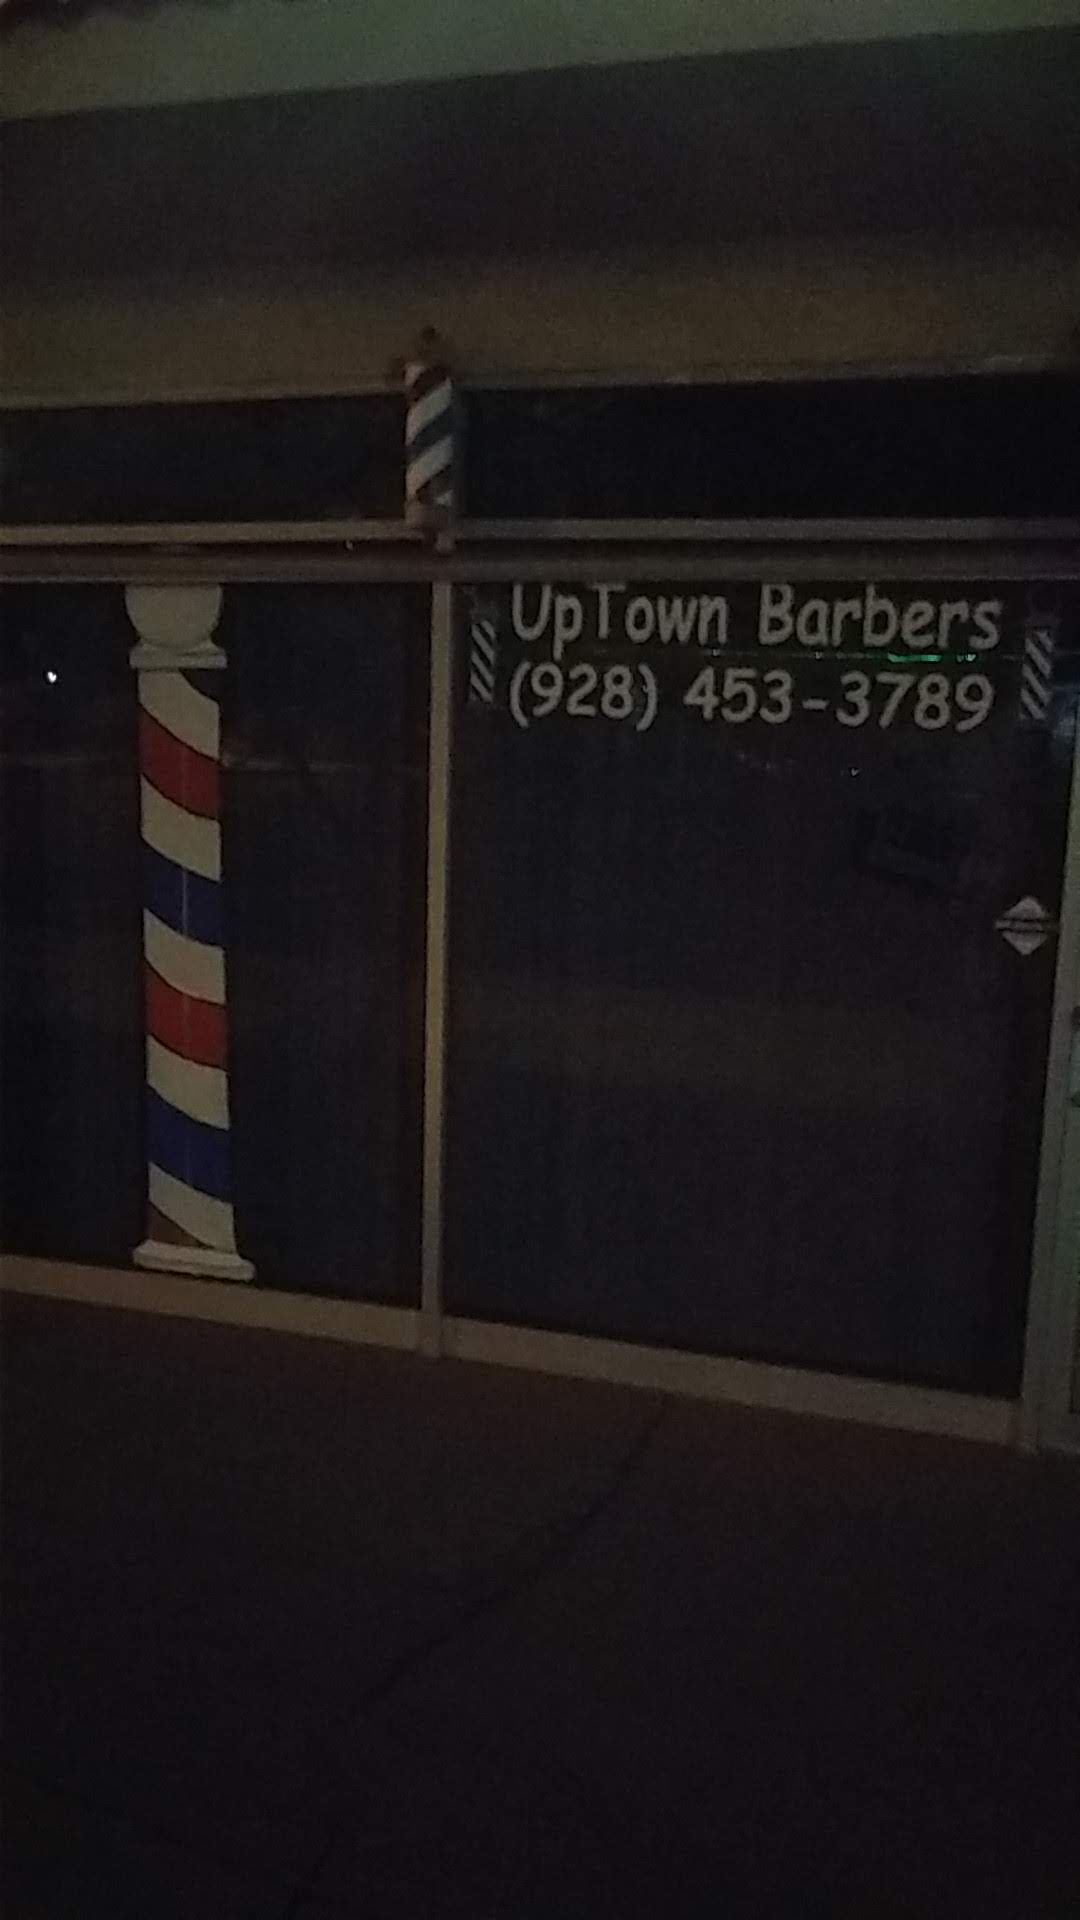 Up Town Barbers